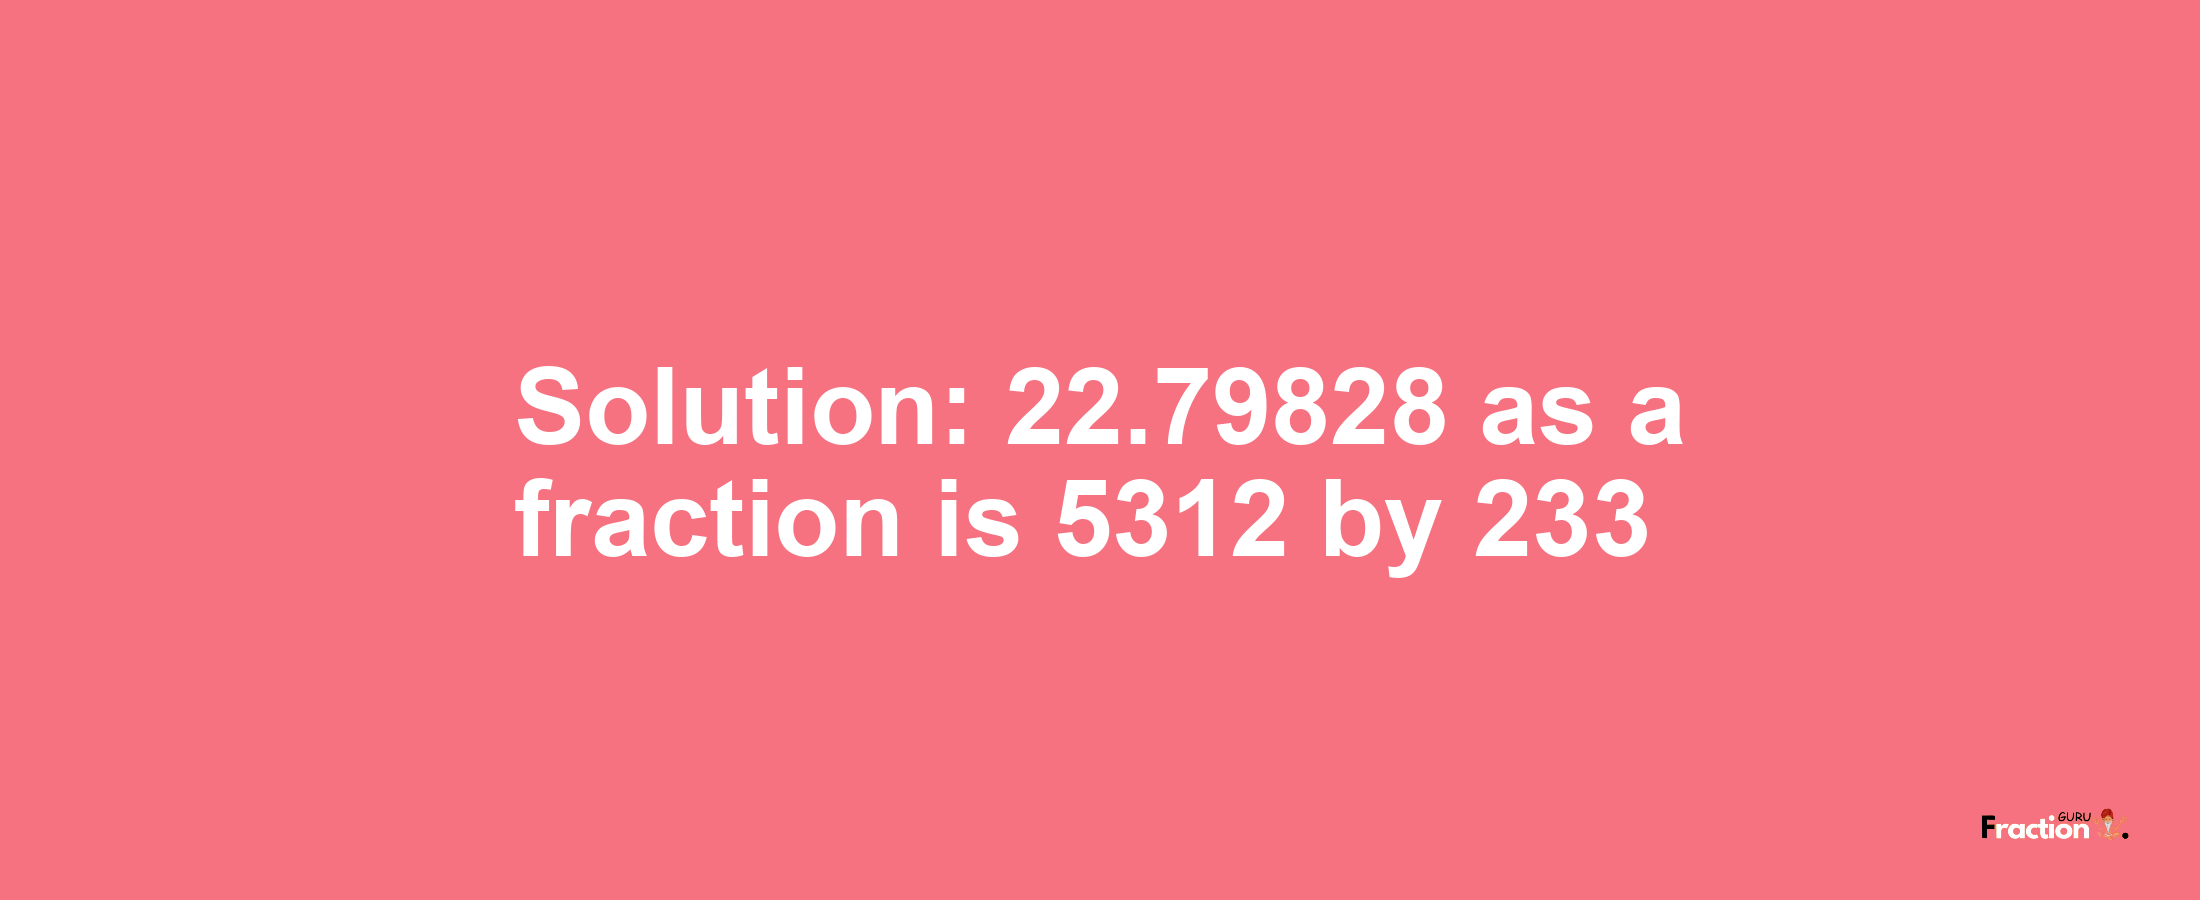 Solution:22.79828 as a fraction is 5312/233